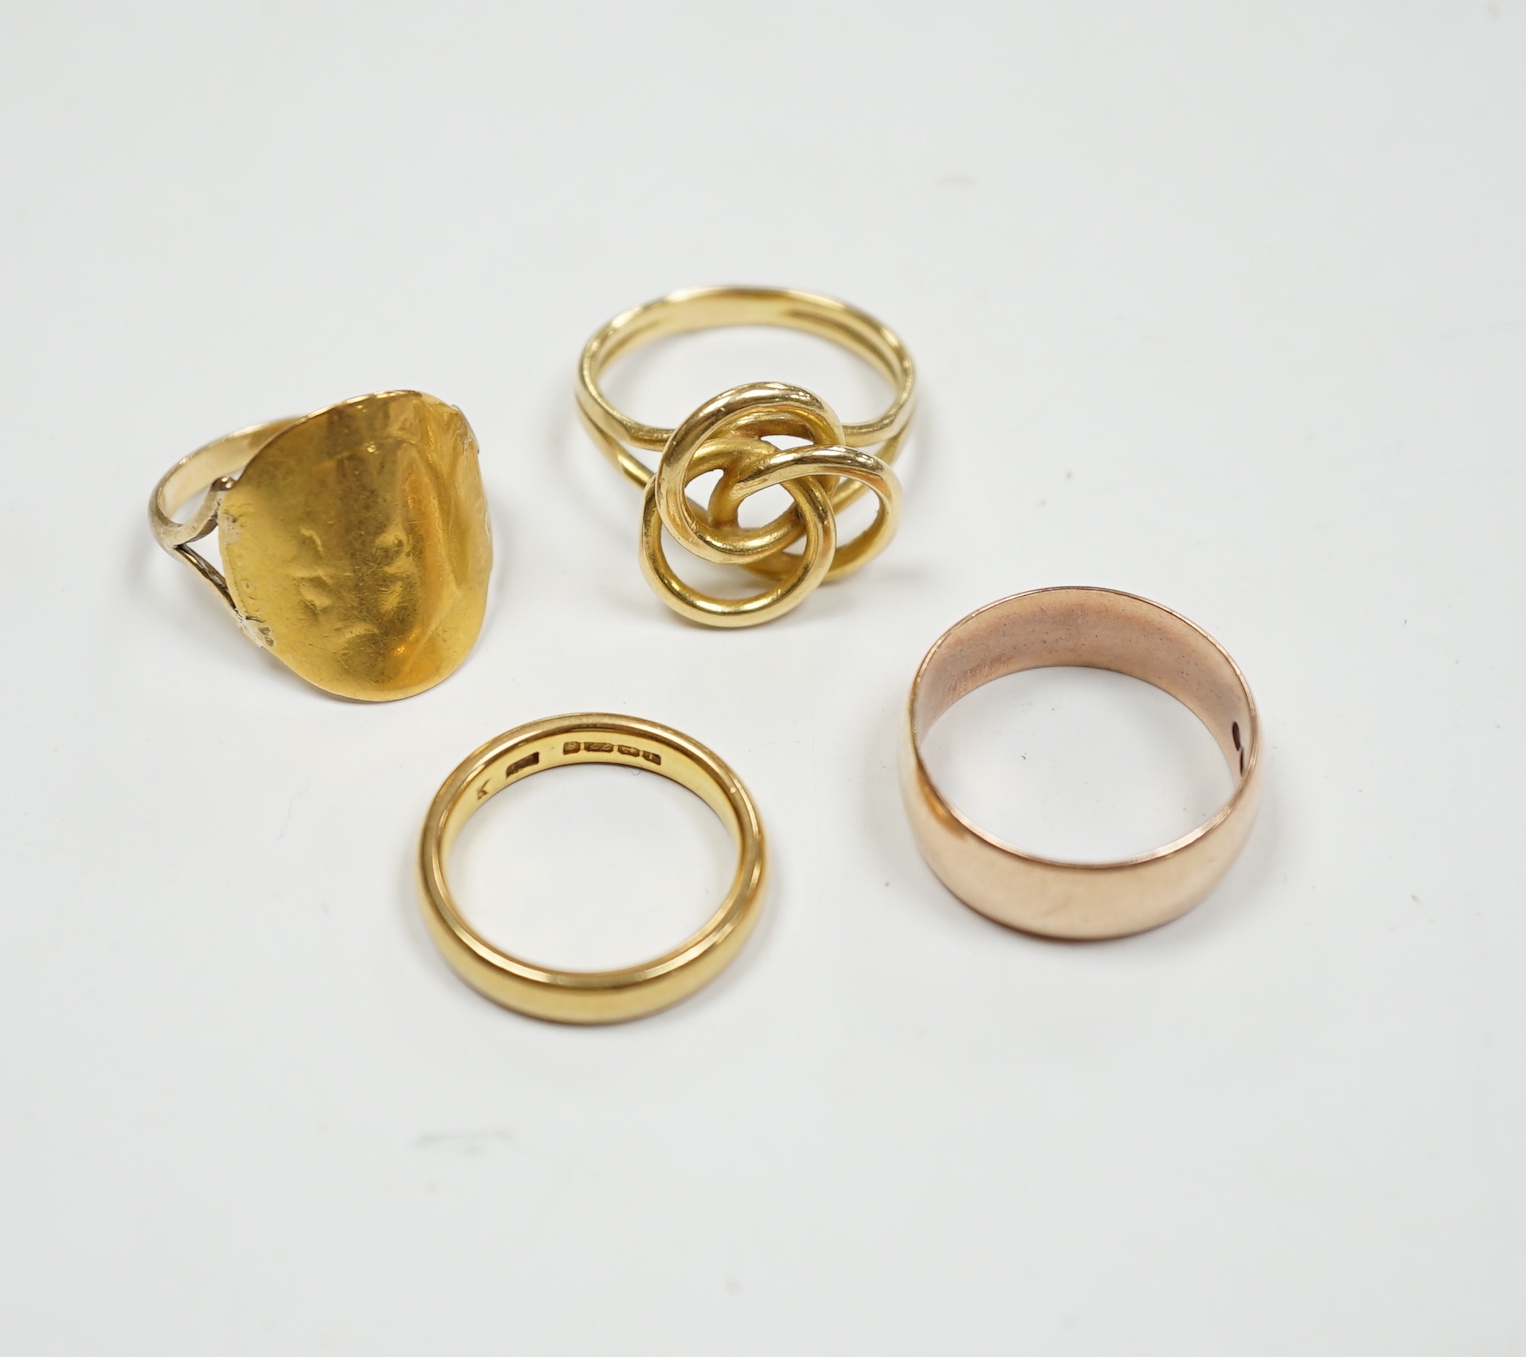 A 1930's 22ct gold wedding band, 5.9 grams, a 9ct gold wedding band, 5.1 grams and two other yellow metal rings, 10.1 grams.